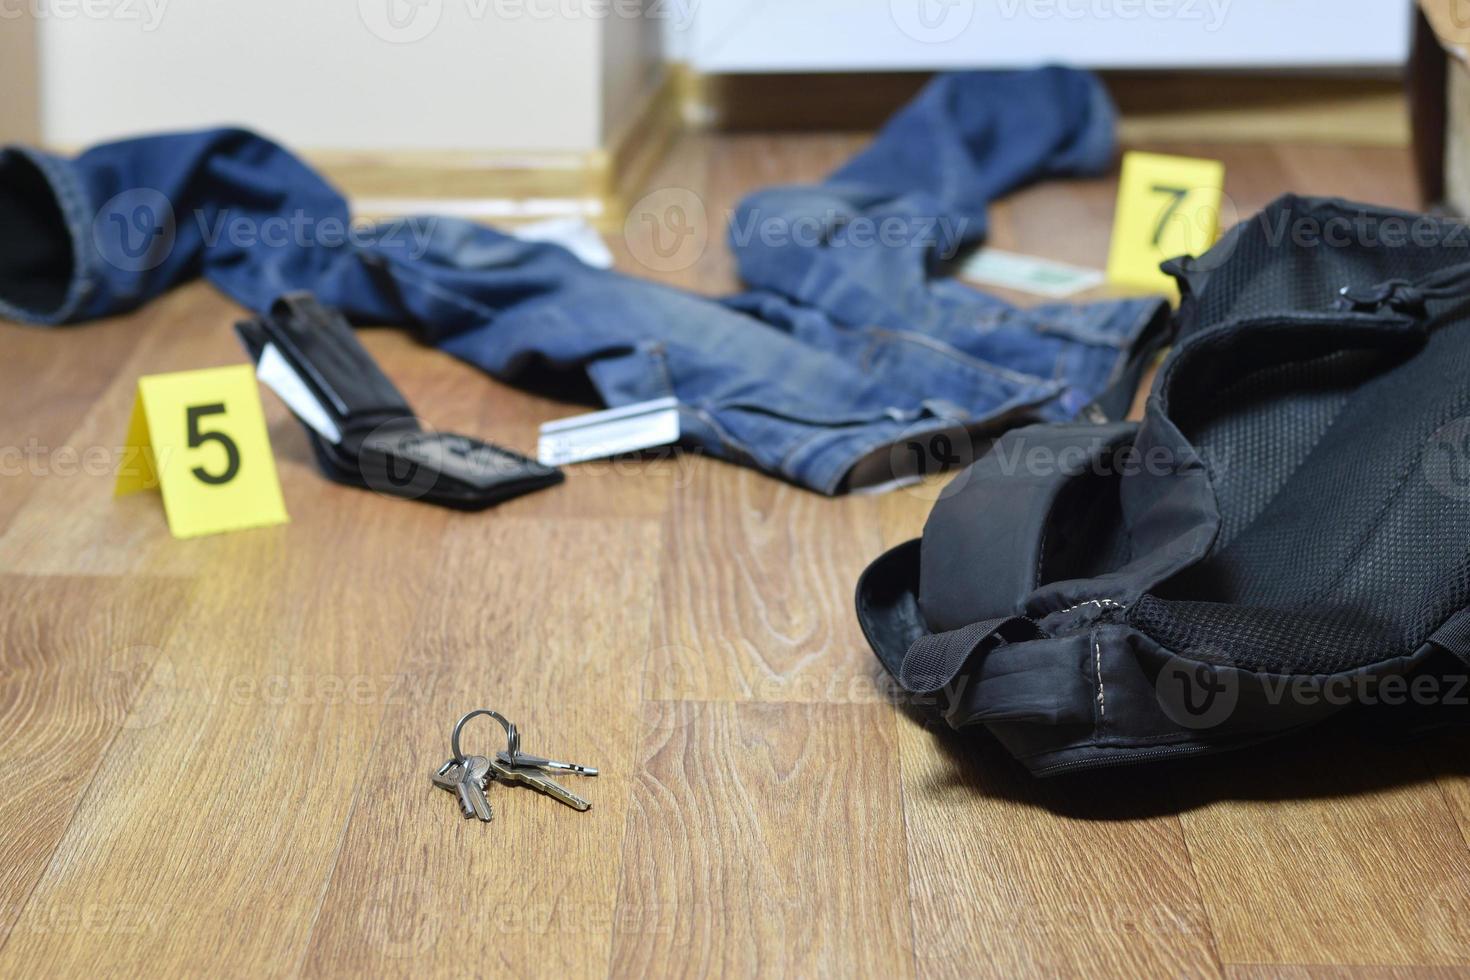 Crime scene investigation - numbering of evidences after the murder in the apartment. Keys, wallet and clothes with evidence markers photo